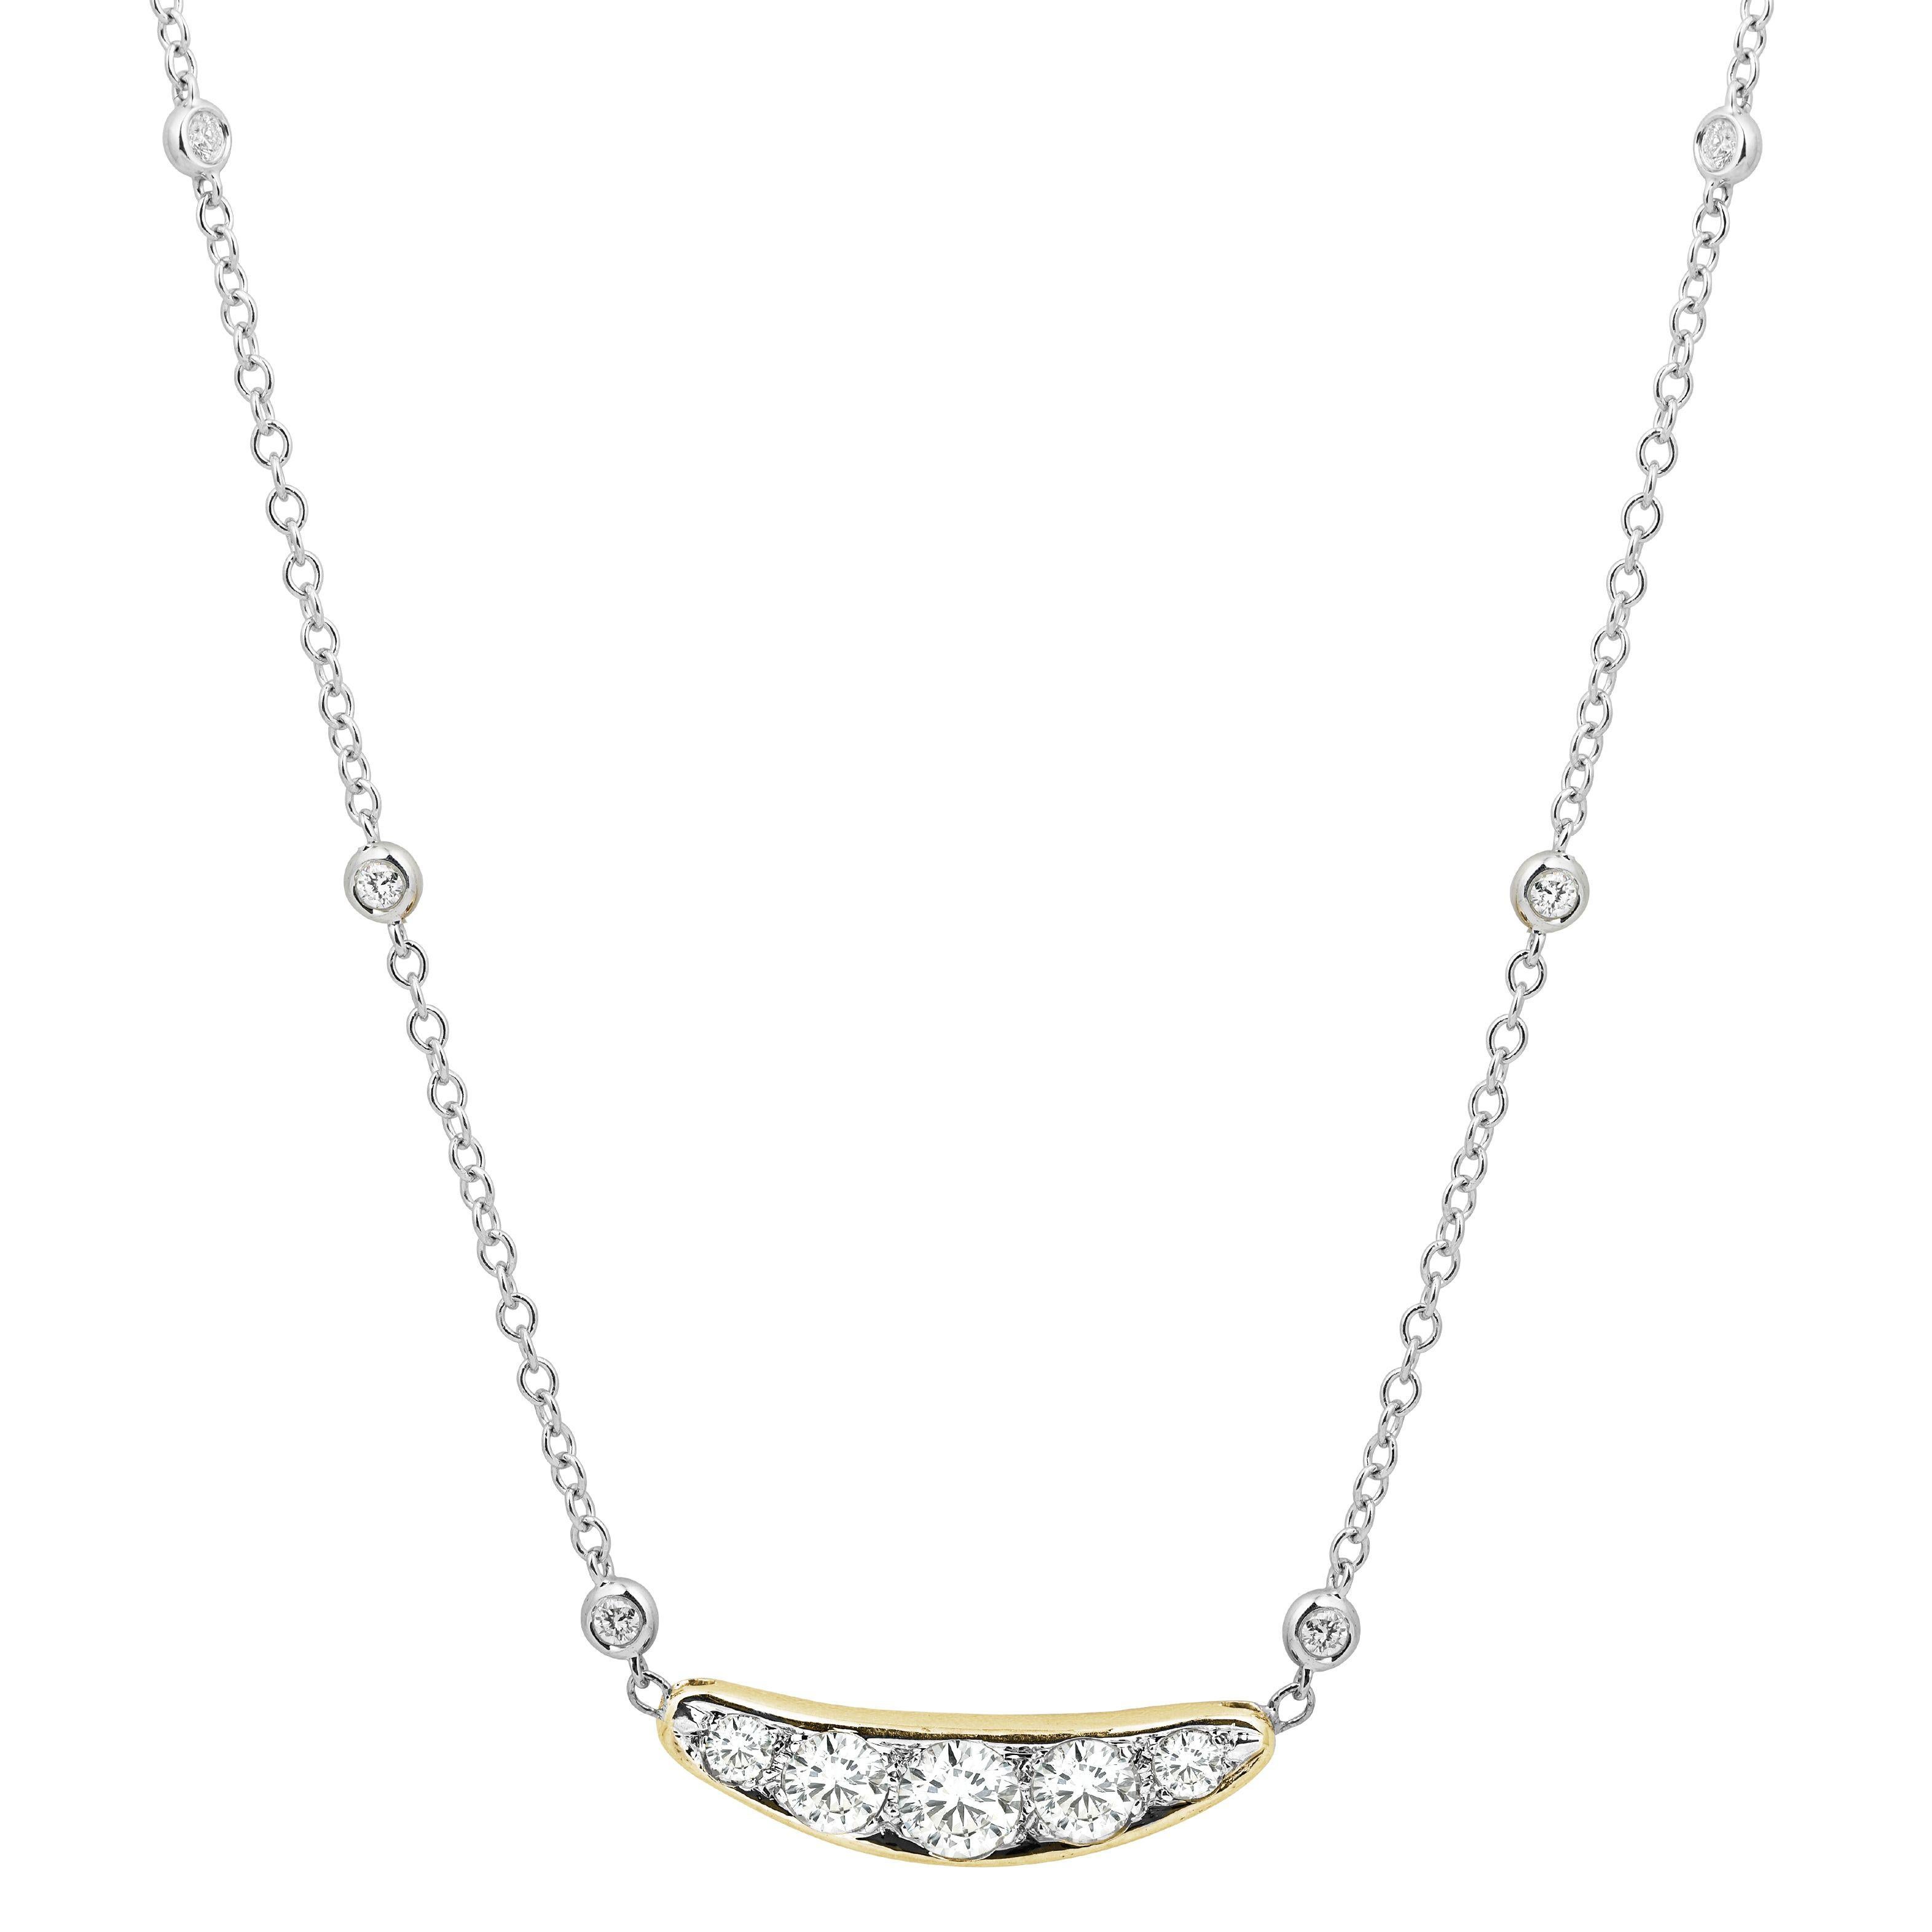 Simply Beautiful! Elegant and finely detailed Edwardian Diamond Pendant Necklace. 18K Yellow Gold Pendant. Hand set with 5 Old European-Cut Diamonds, weighing approx. 2.62tcw Pendant measures approx. 1.25” L x 0.25” W. Suspended from a 14K White